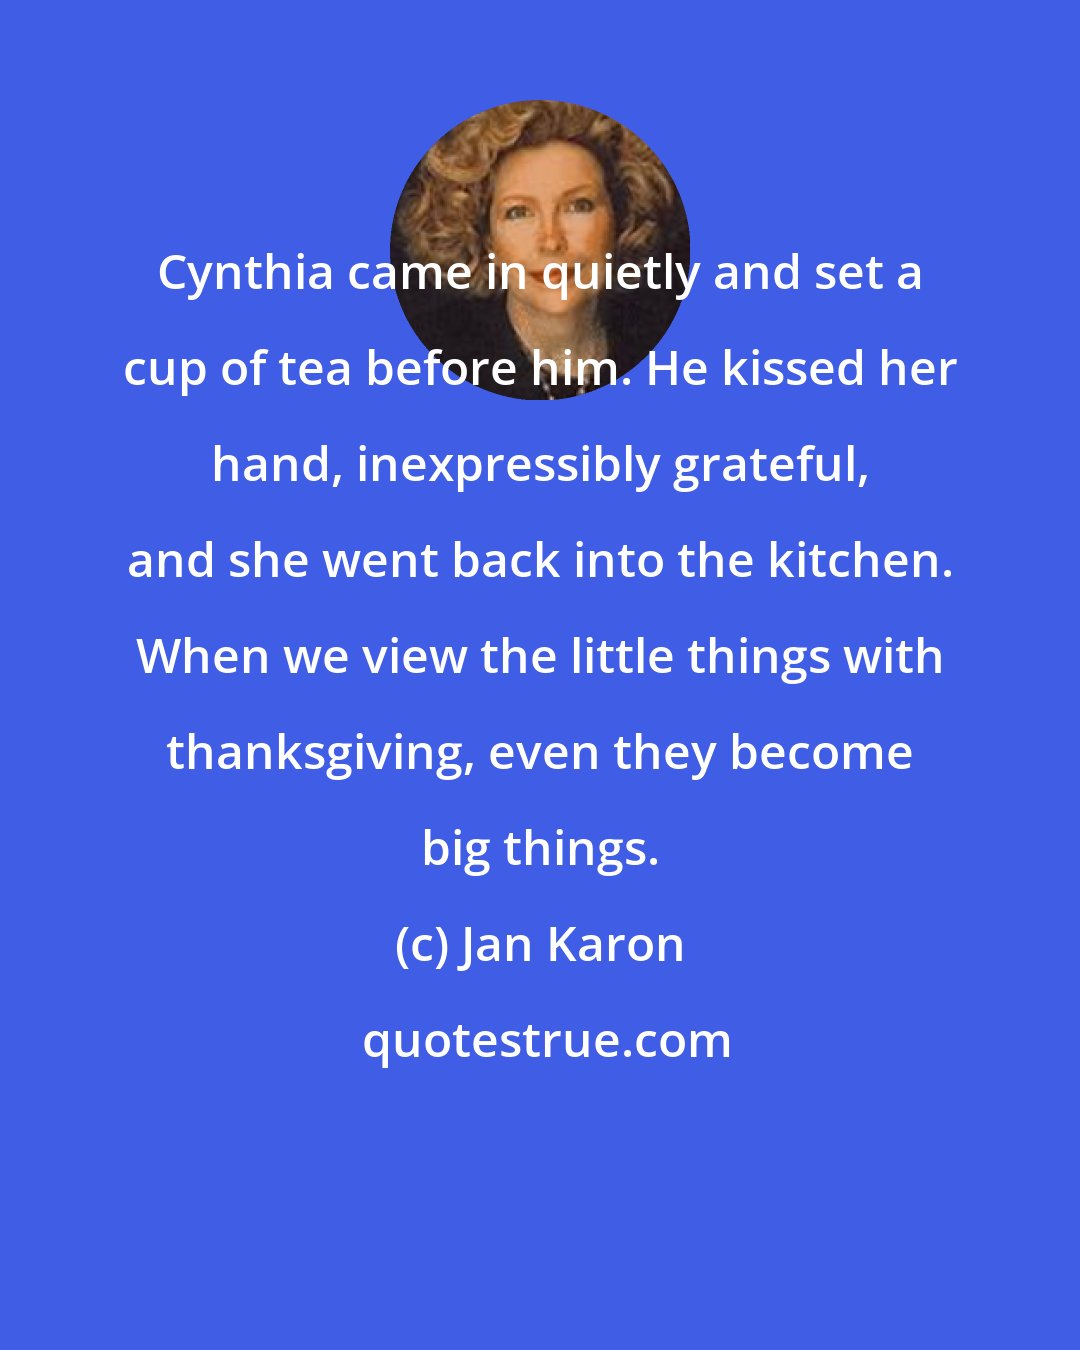 Jan Karon: Cynthia came in quietly and set a cup of tea before him. He kissed her hand, inexpressibly grateful, and she went back into the kitchen. When we view the little things with thanksgiving, even they become big things.